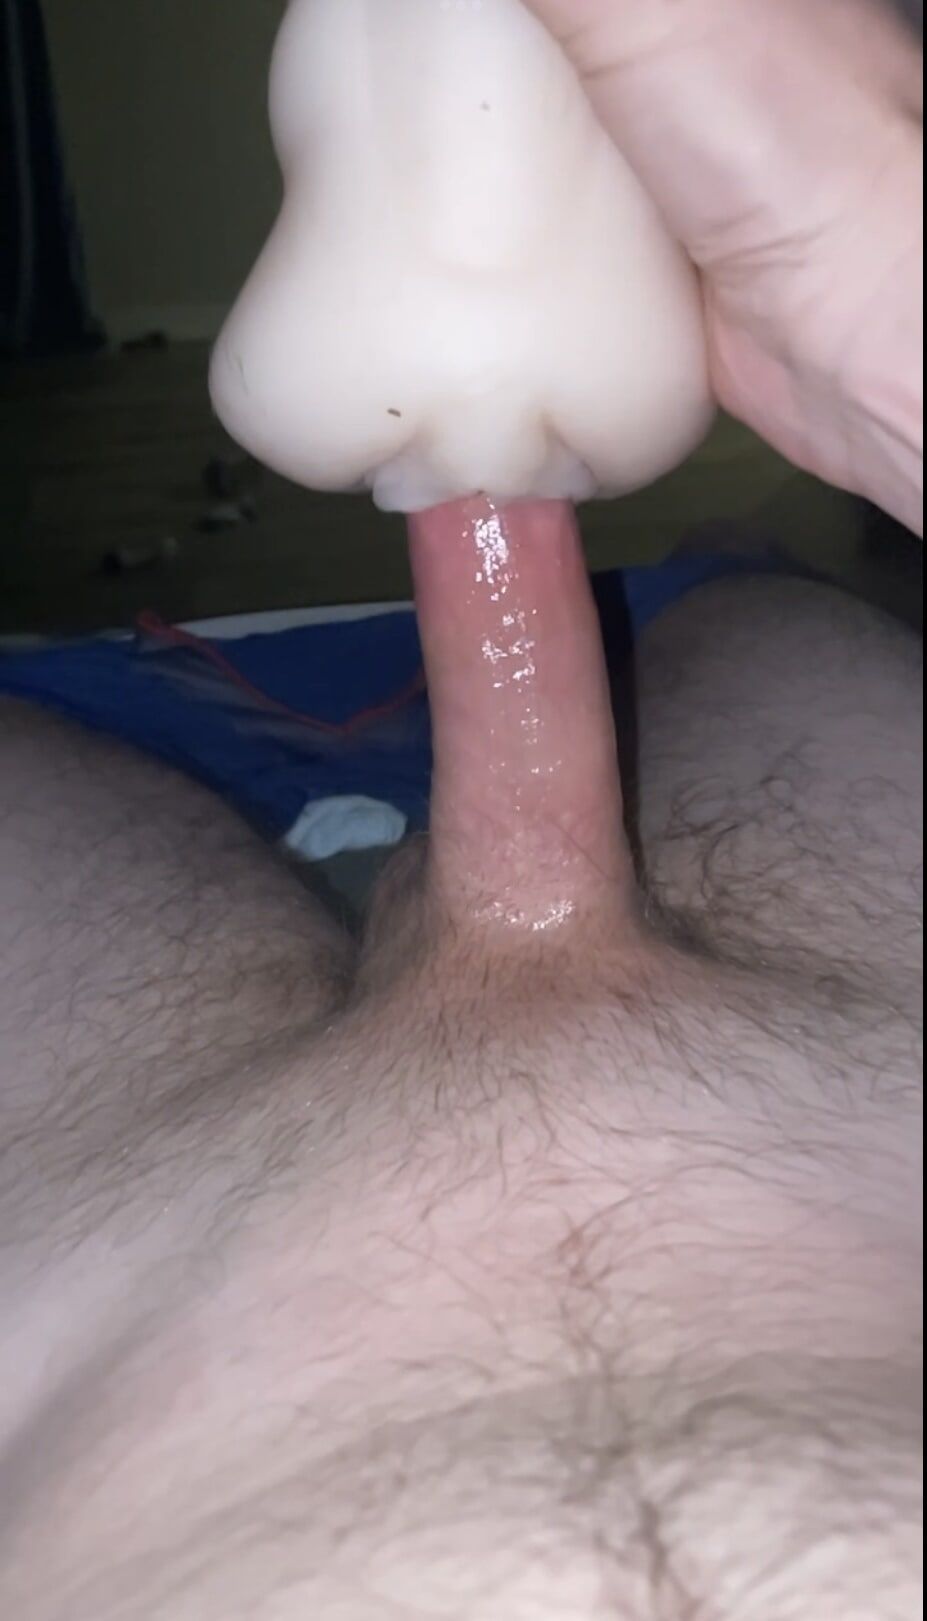 More pictures of my cock #9